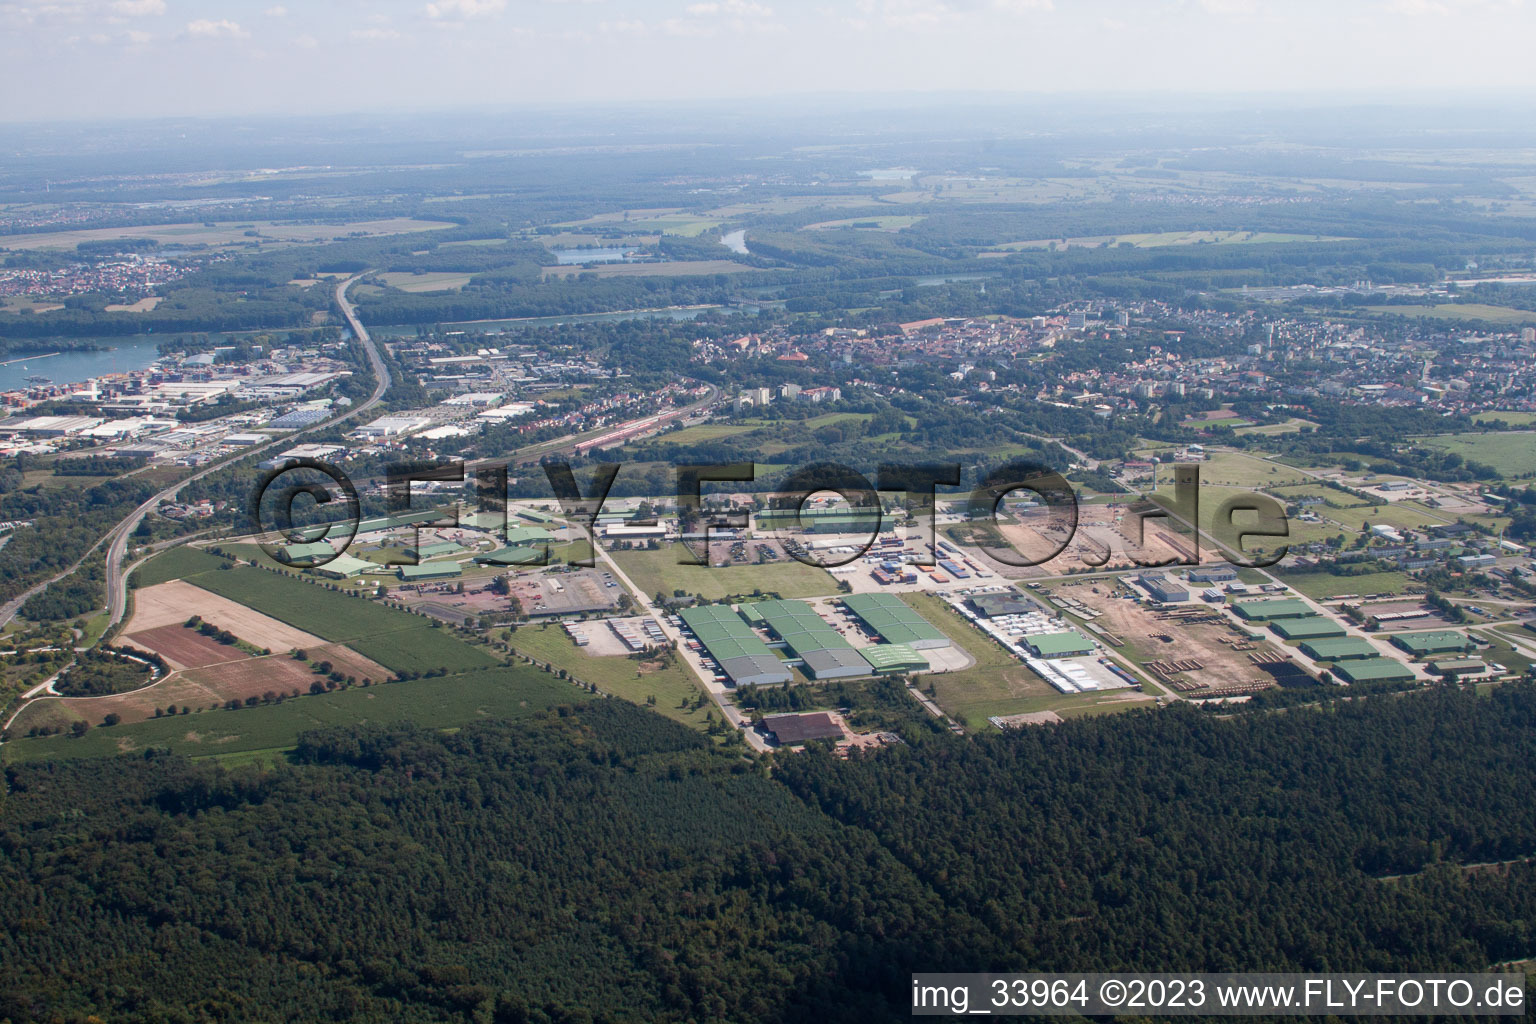 Aerial photograpy of Armed forces in Germersheim in the state Rhineland-Palatinate, Germany